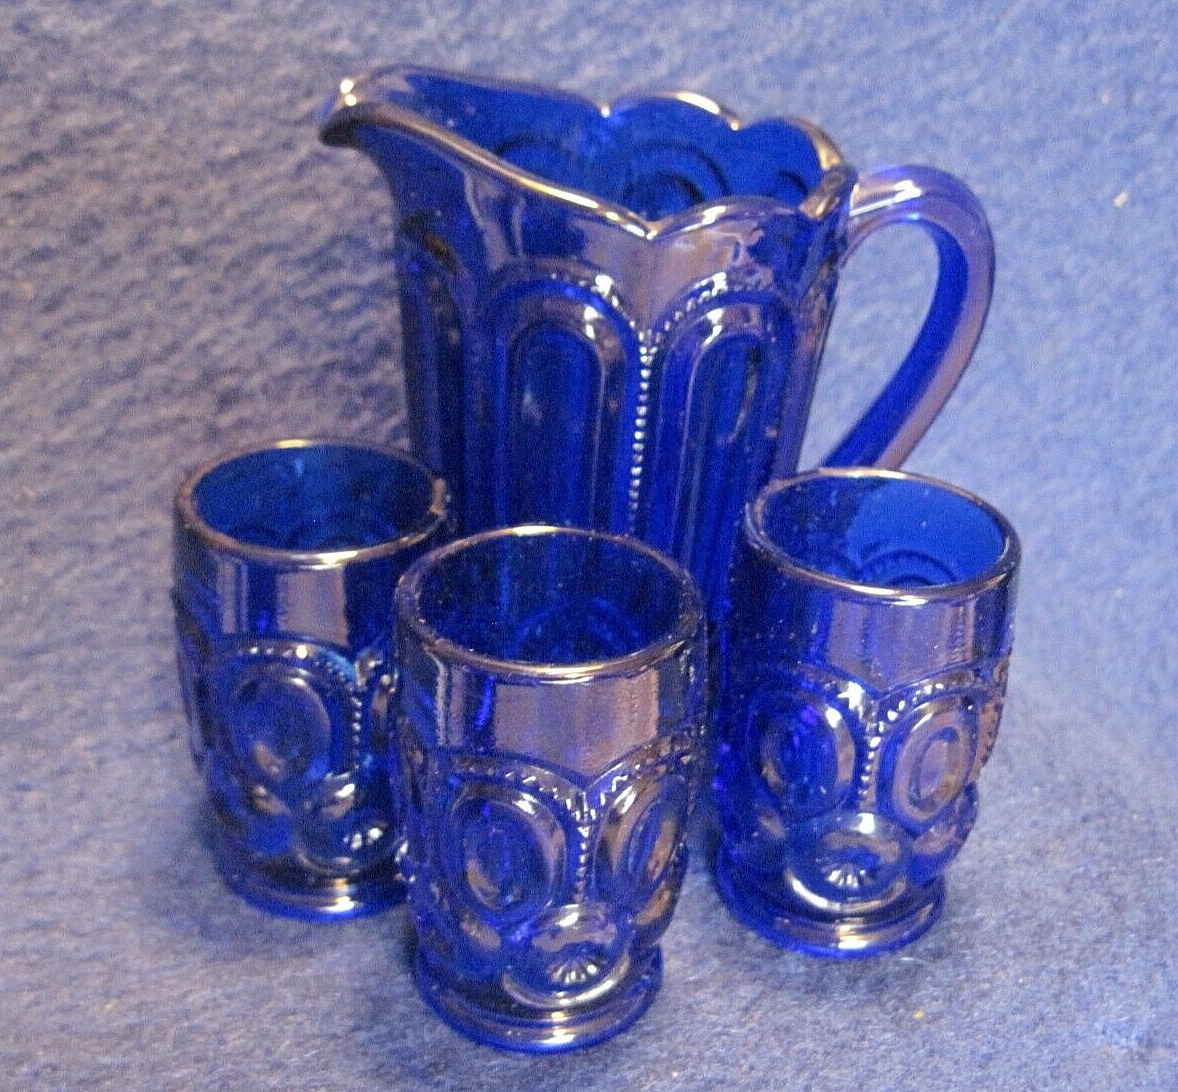 Vintage Weishar Moon and Star Mini Pitcher with 3 Glasses